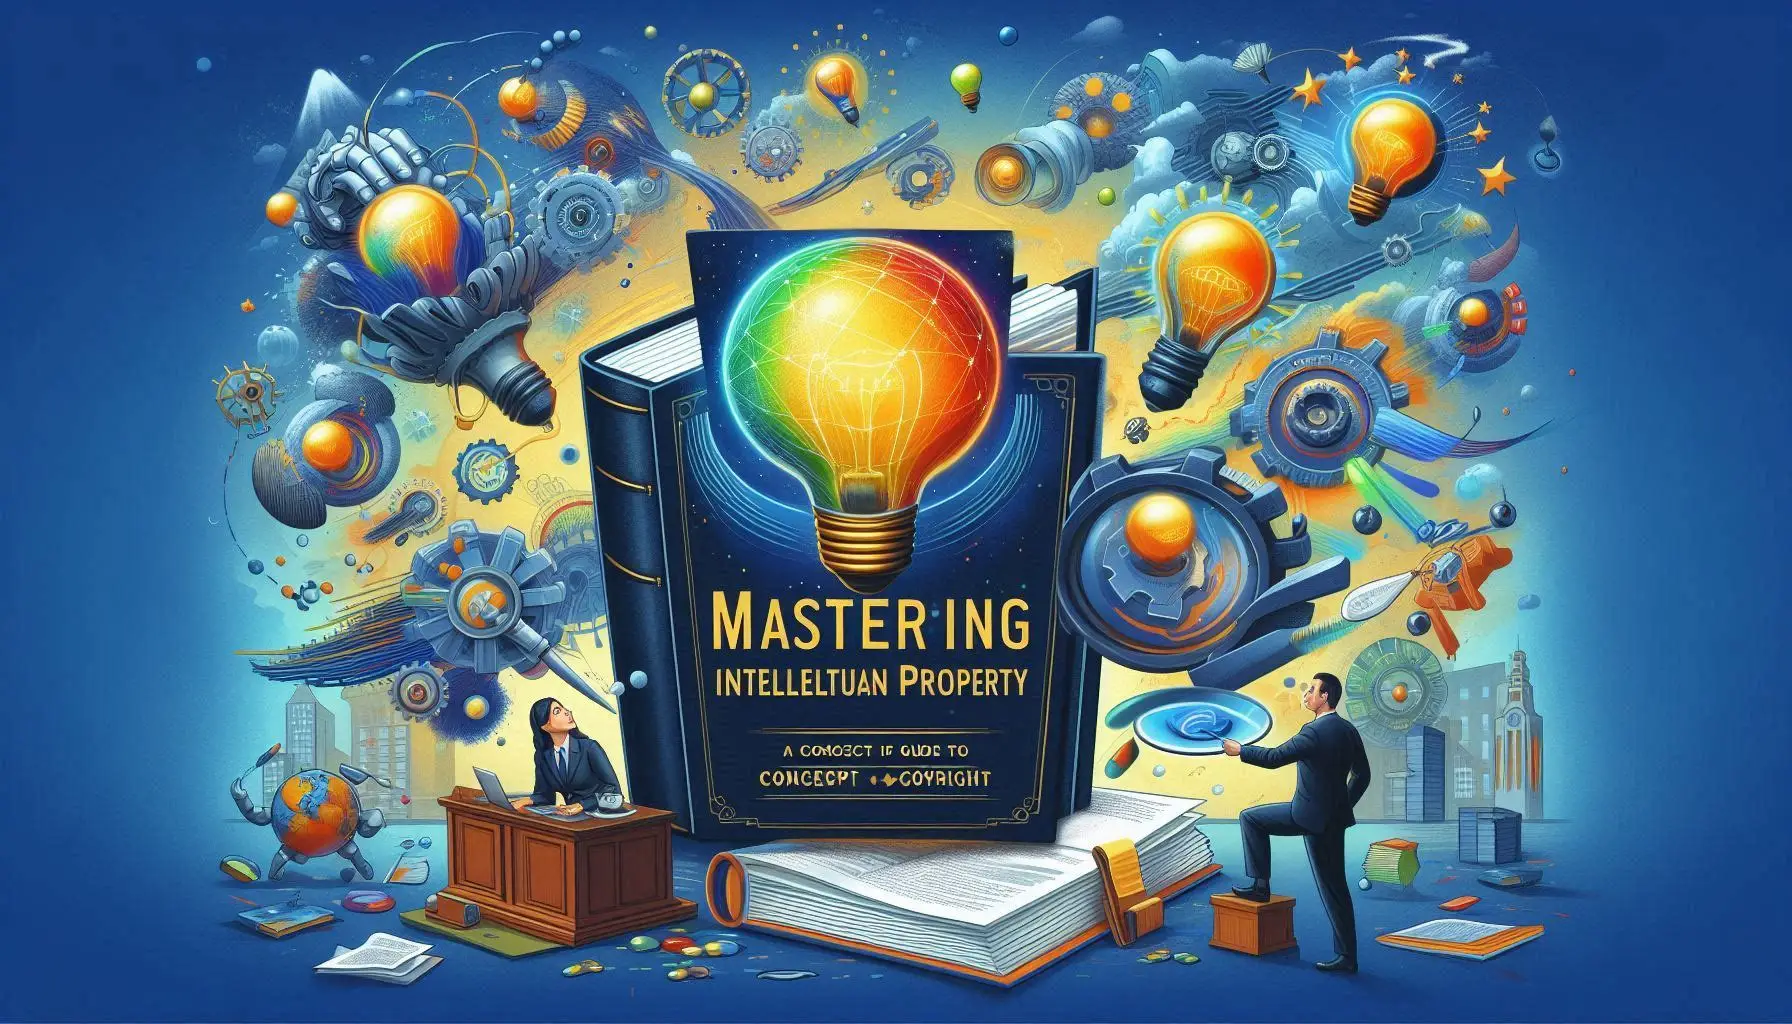 Mastering Intellectual Property-Your Guide from Concept to Copyright